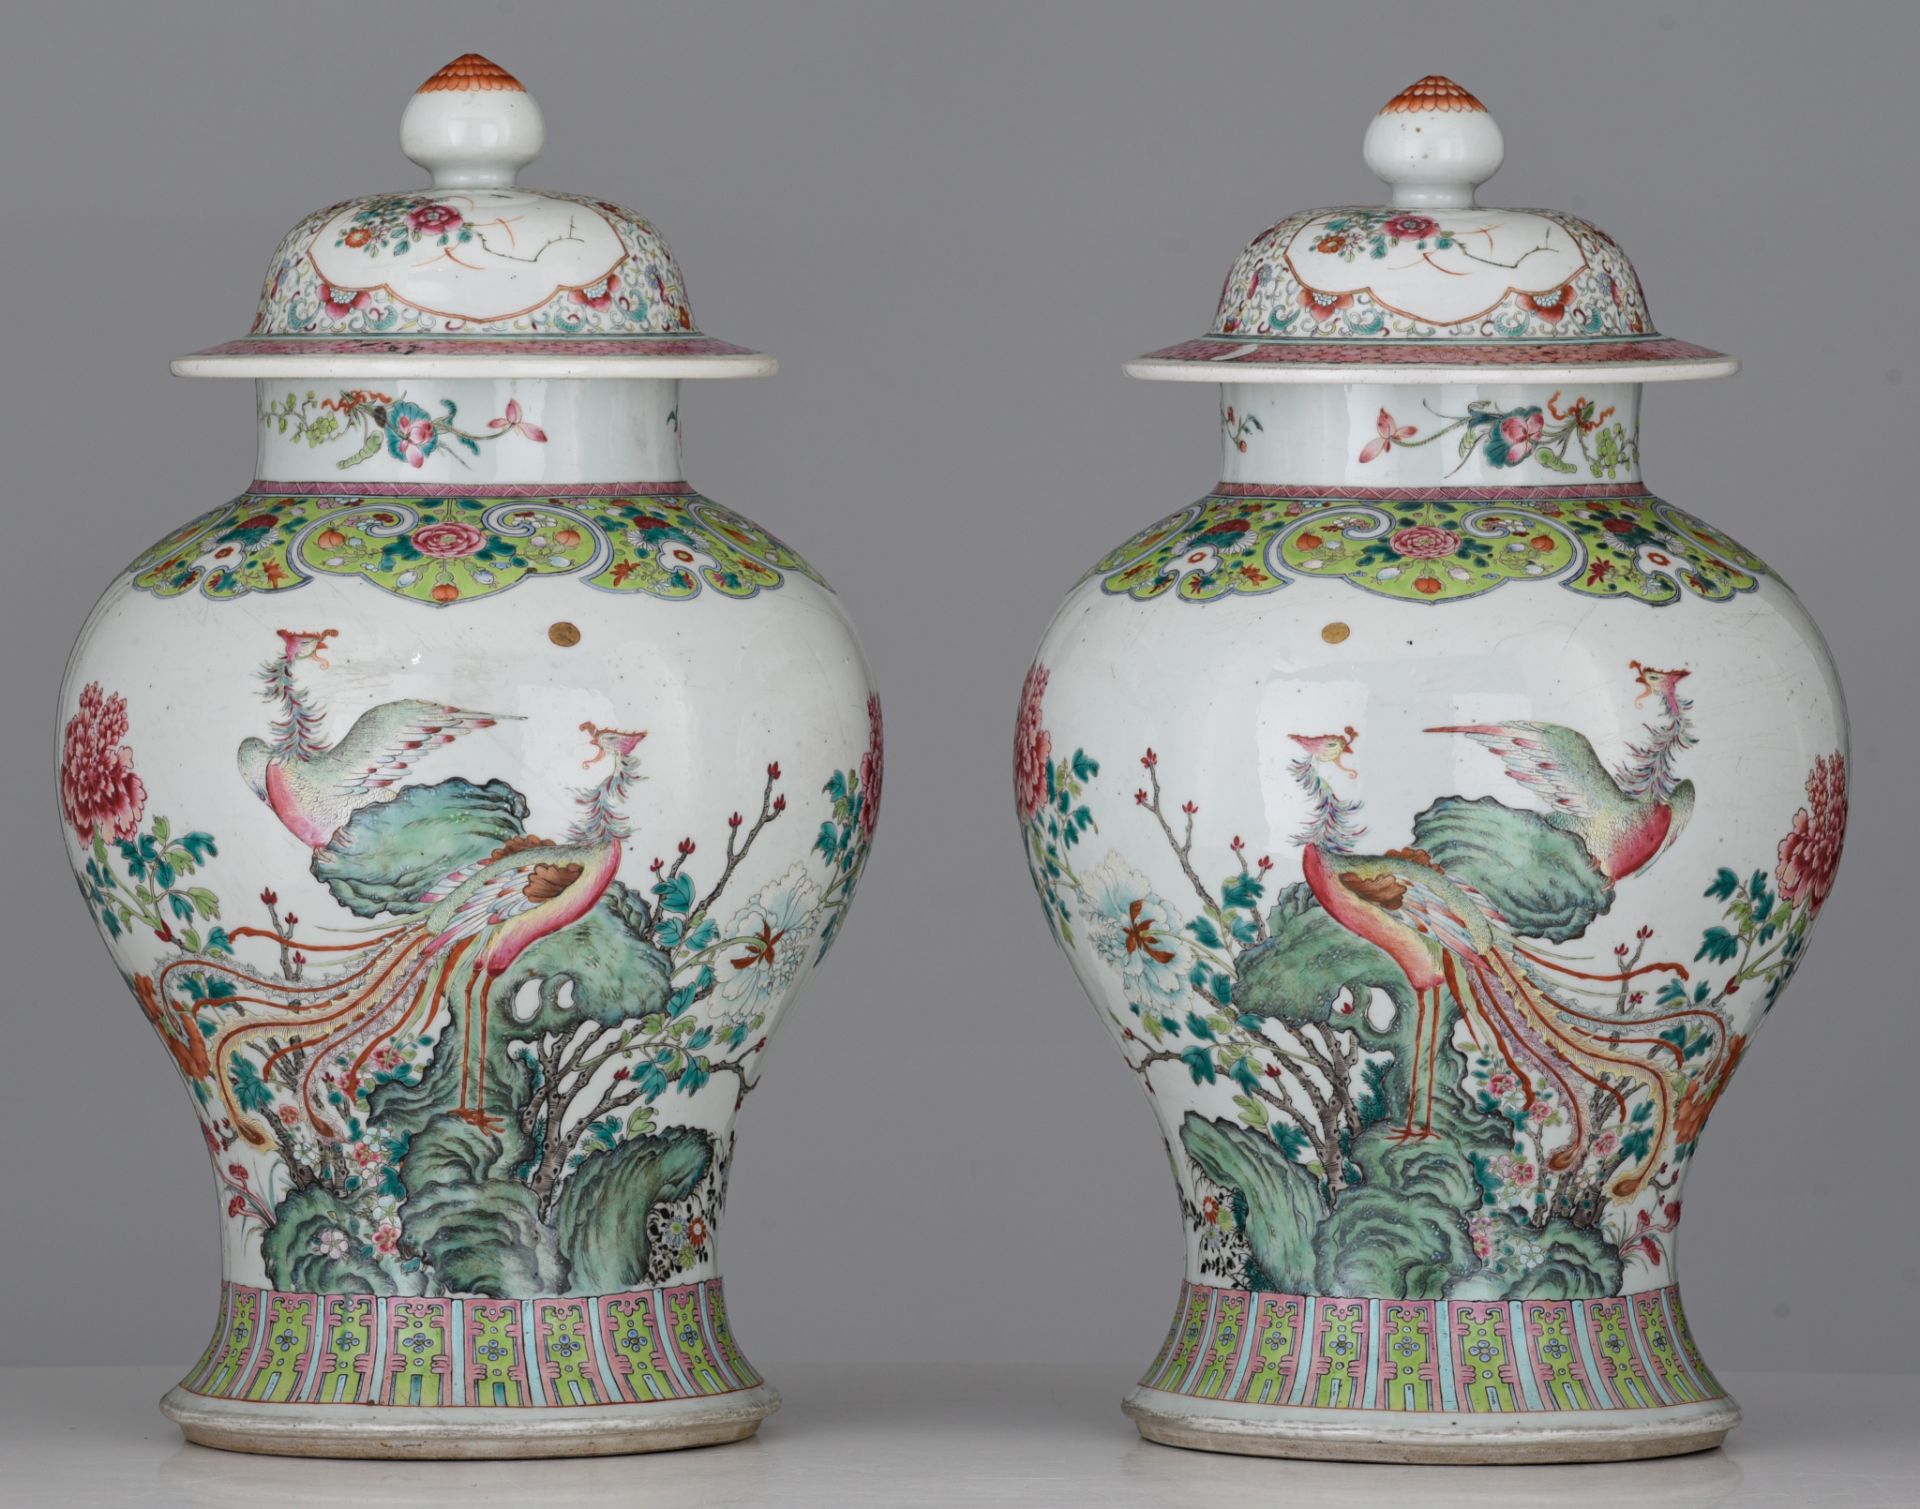 A fine pair of Chinese famille rose 'Phoenix' covered vases, 19thC, H 44,5 cm - Image 2 of 7